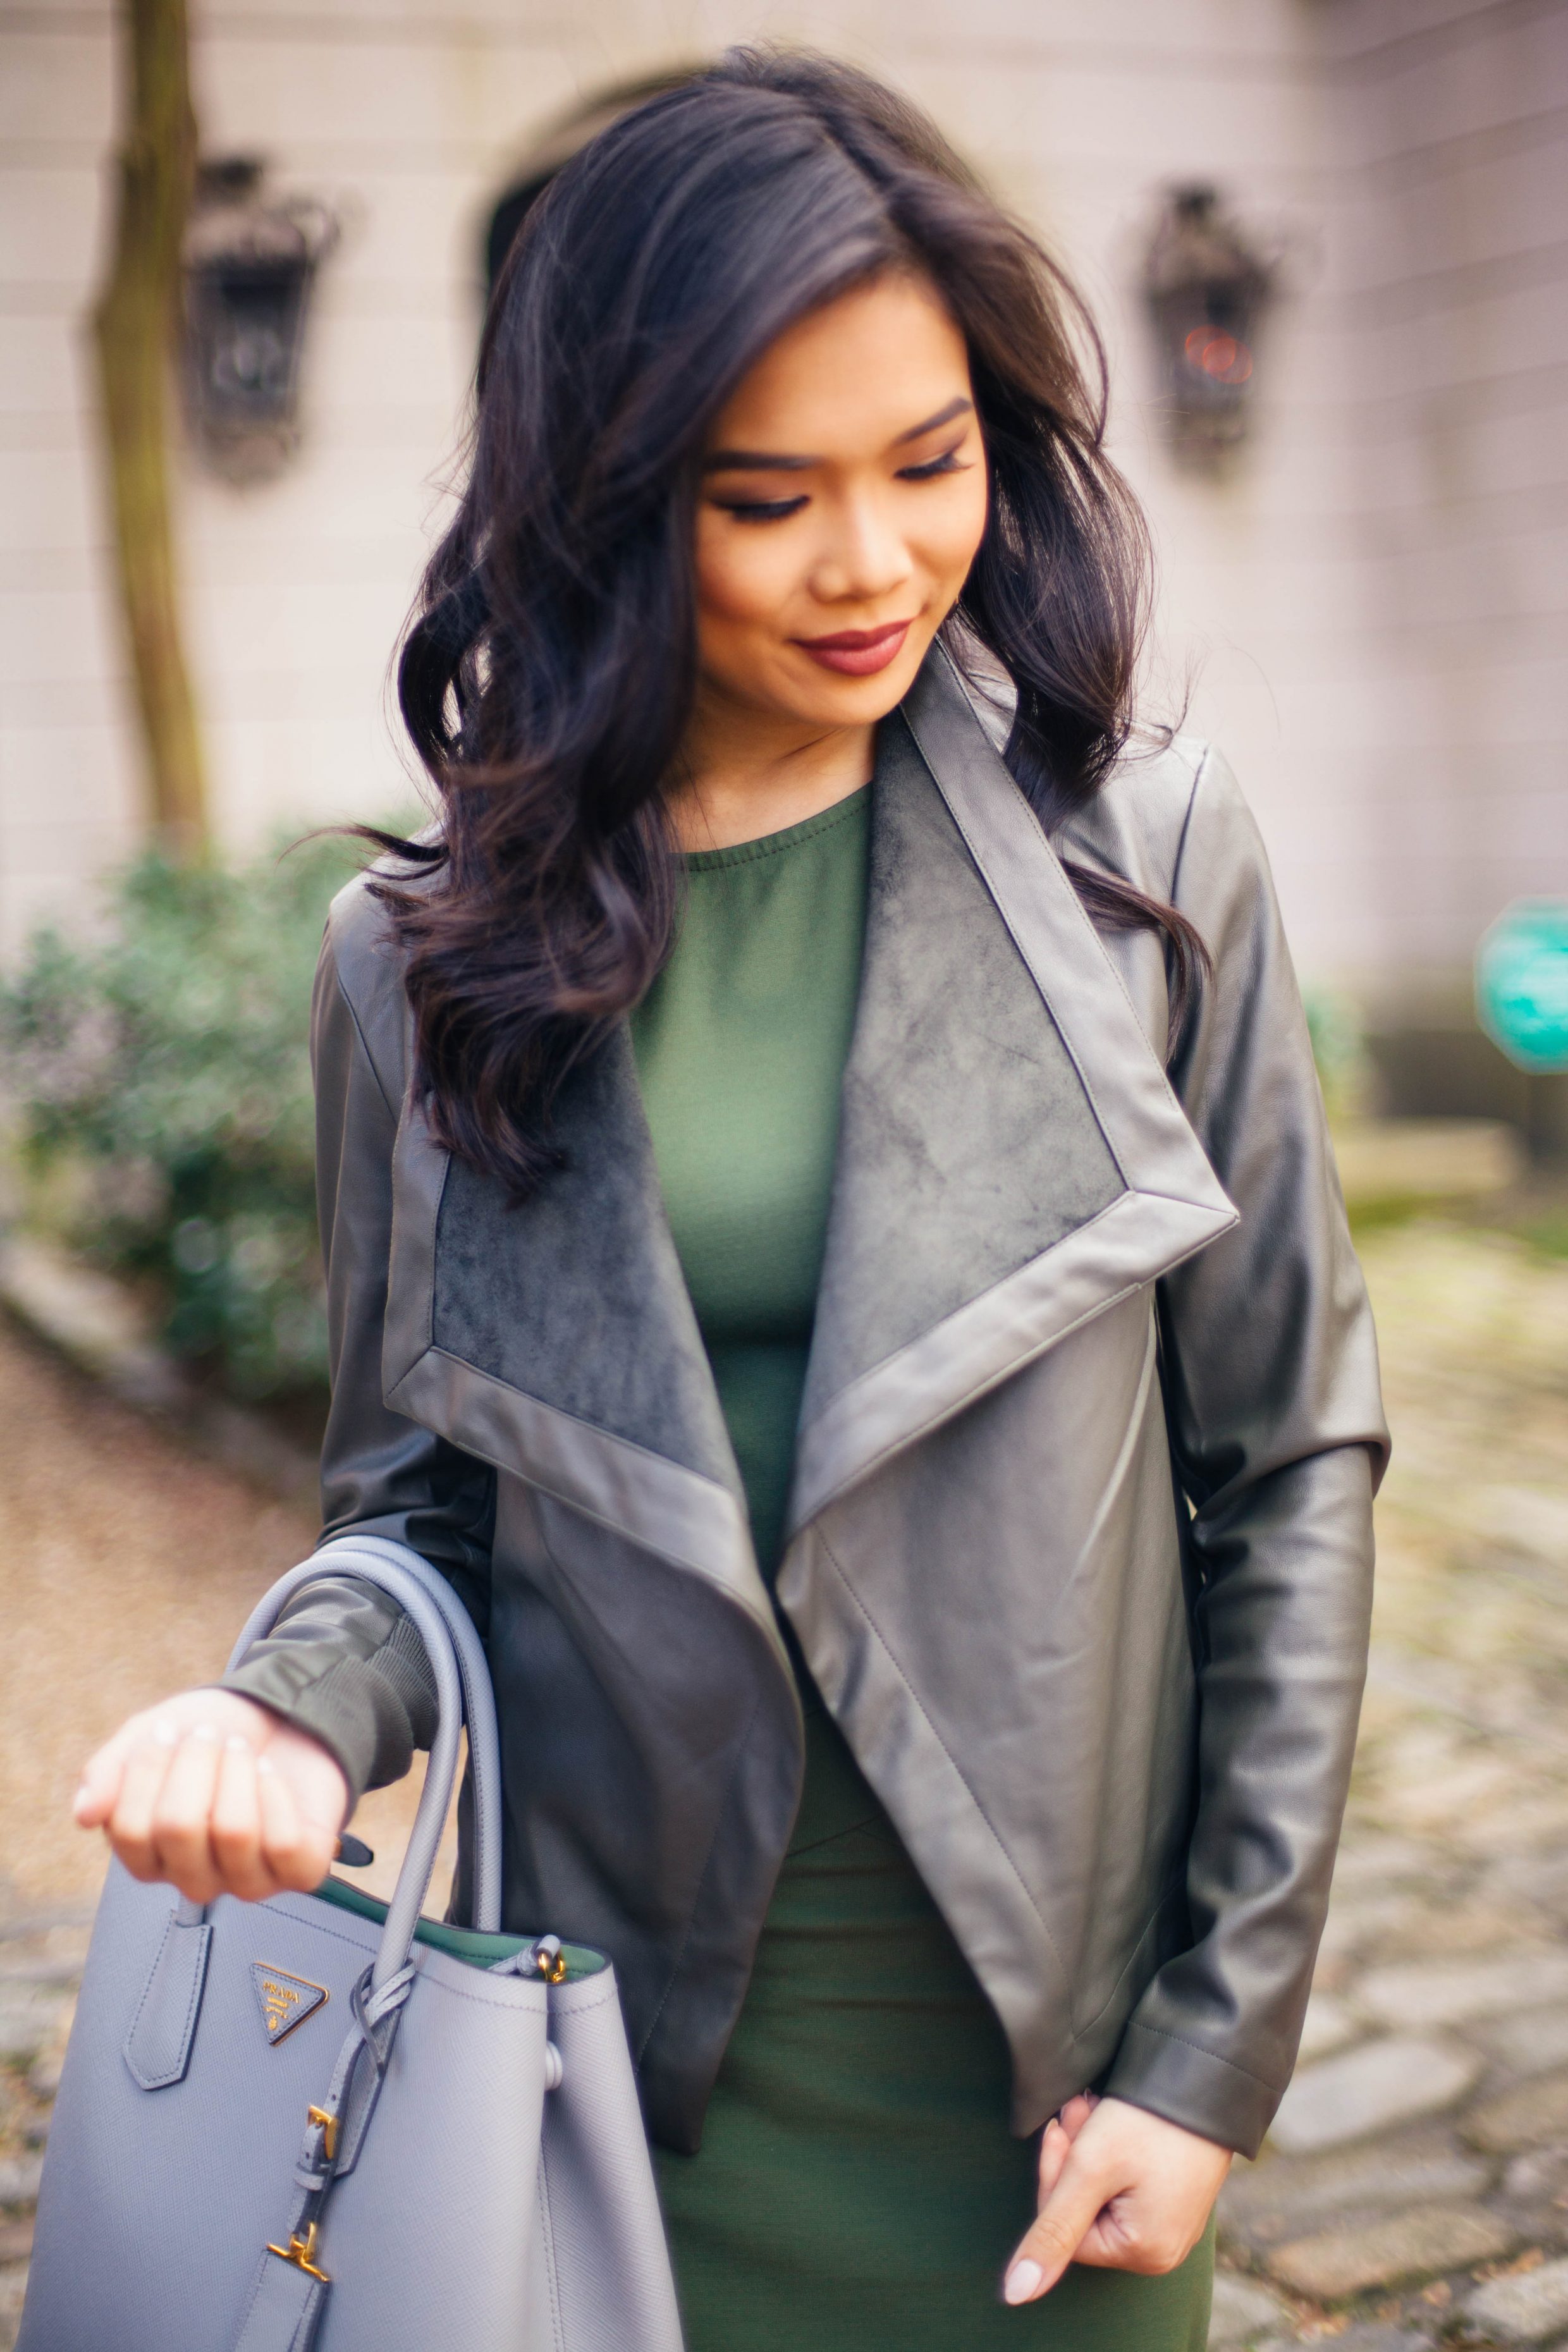 Blogger Hoang-Kim wears the Peppin Coat by BB Dakota, which also comes in six colors